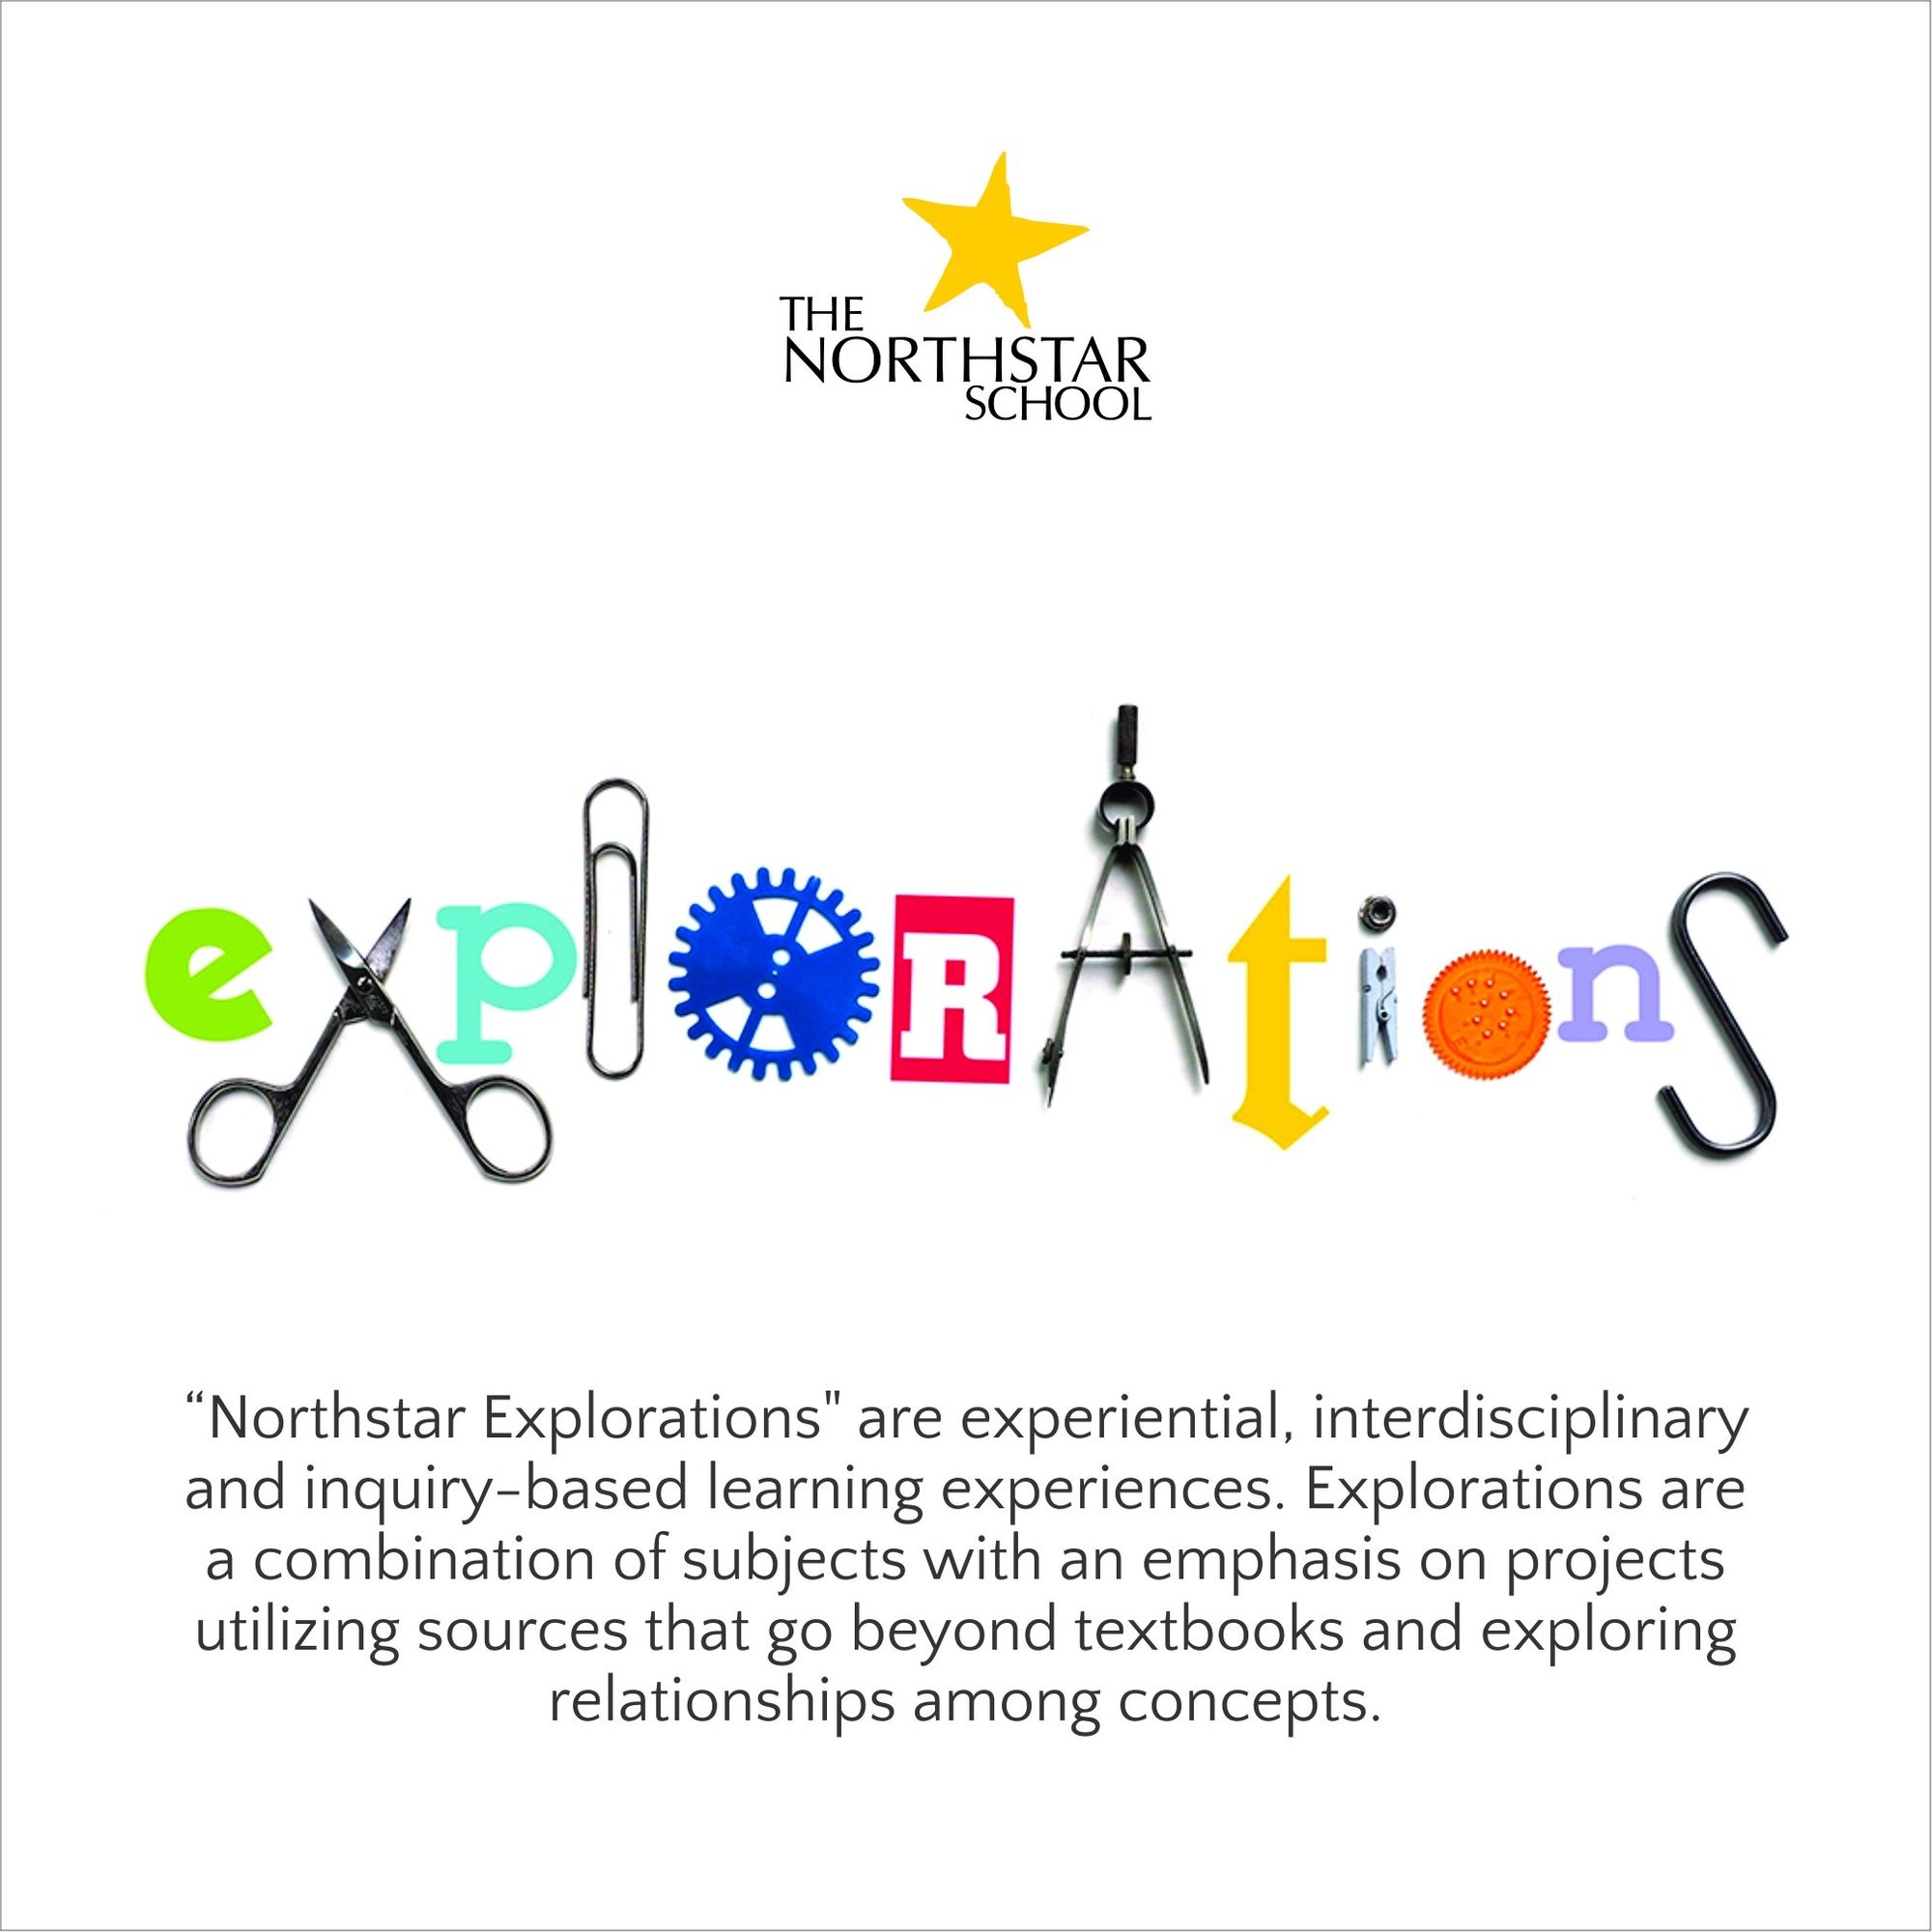 Our flagship learning experience